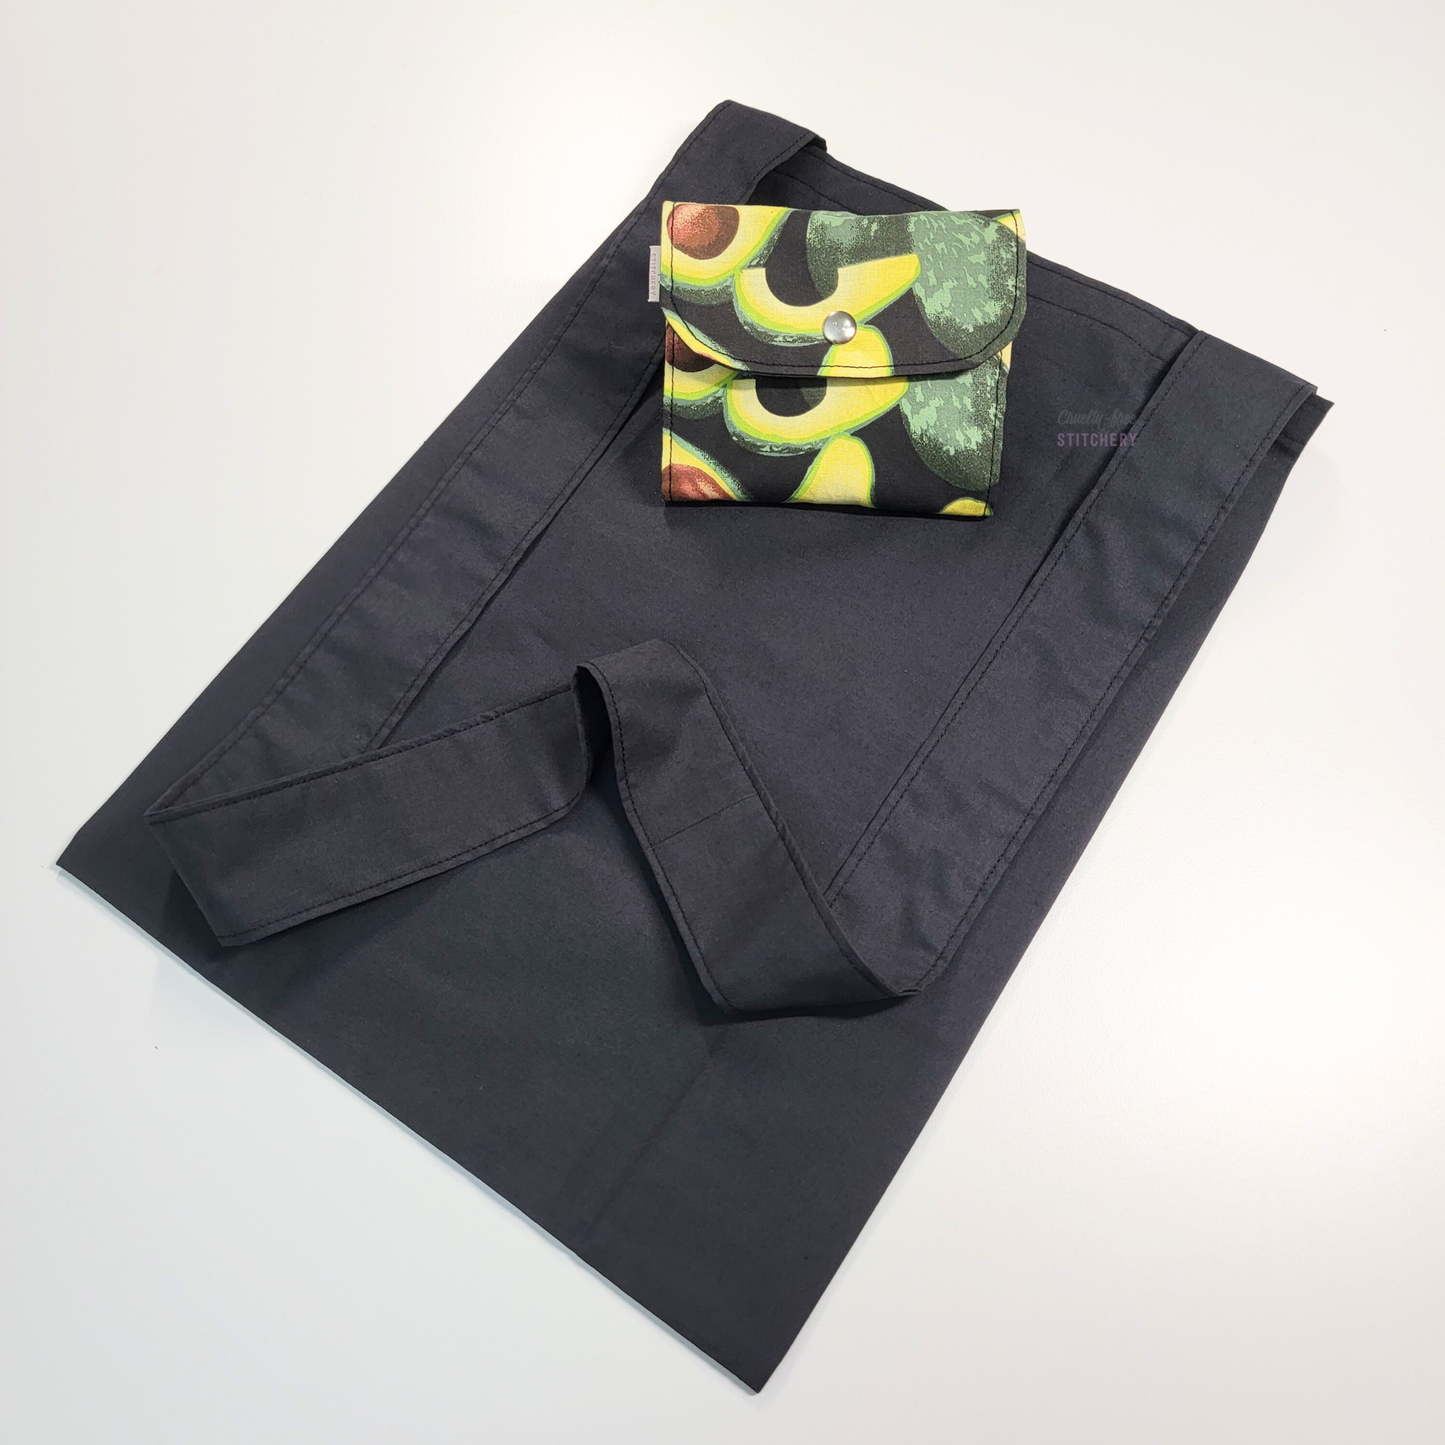 A black tote bag with a long strap. On top of the bag is another bag that has been folded up and snapped together like a wallet. The outer part is a black fabric with avocados.